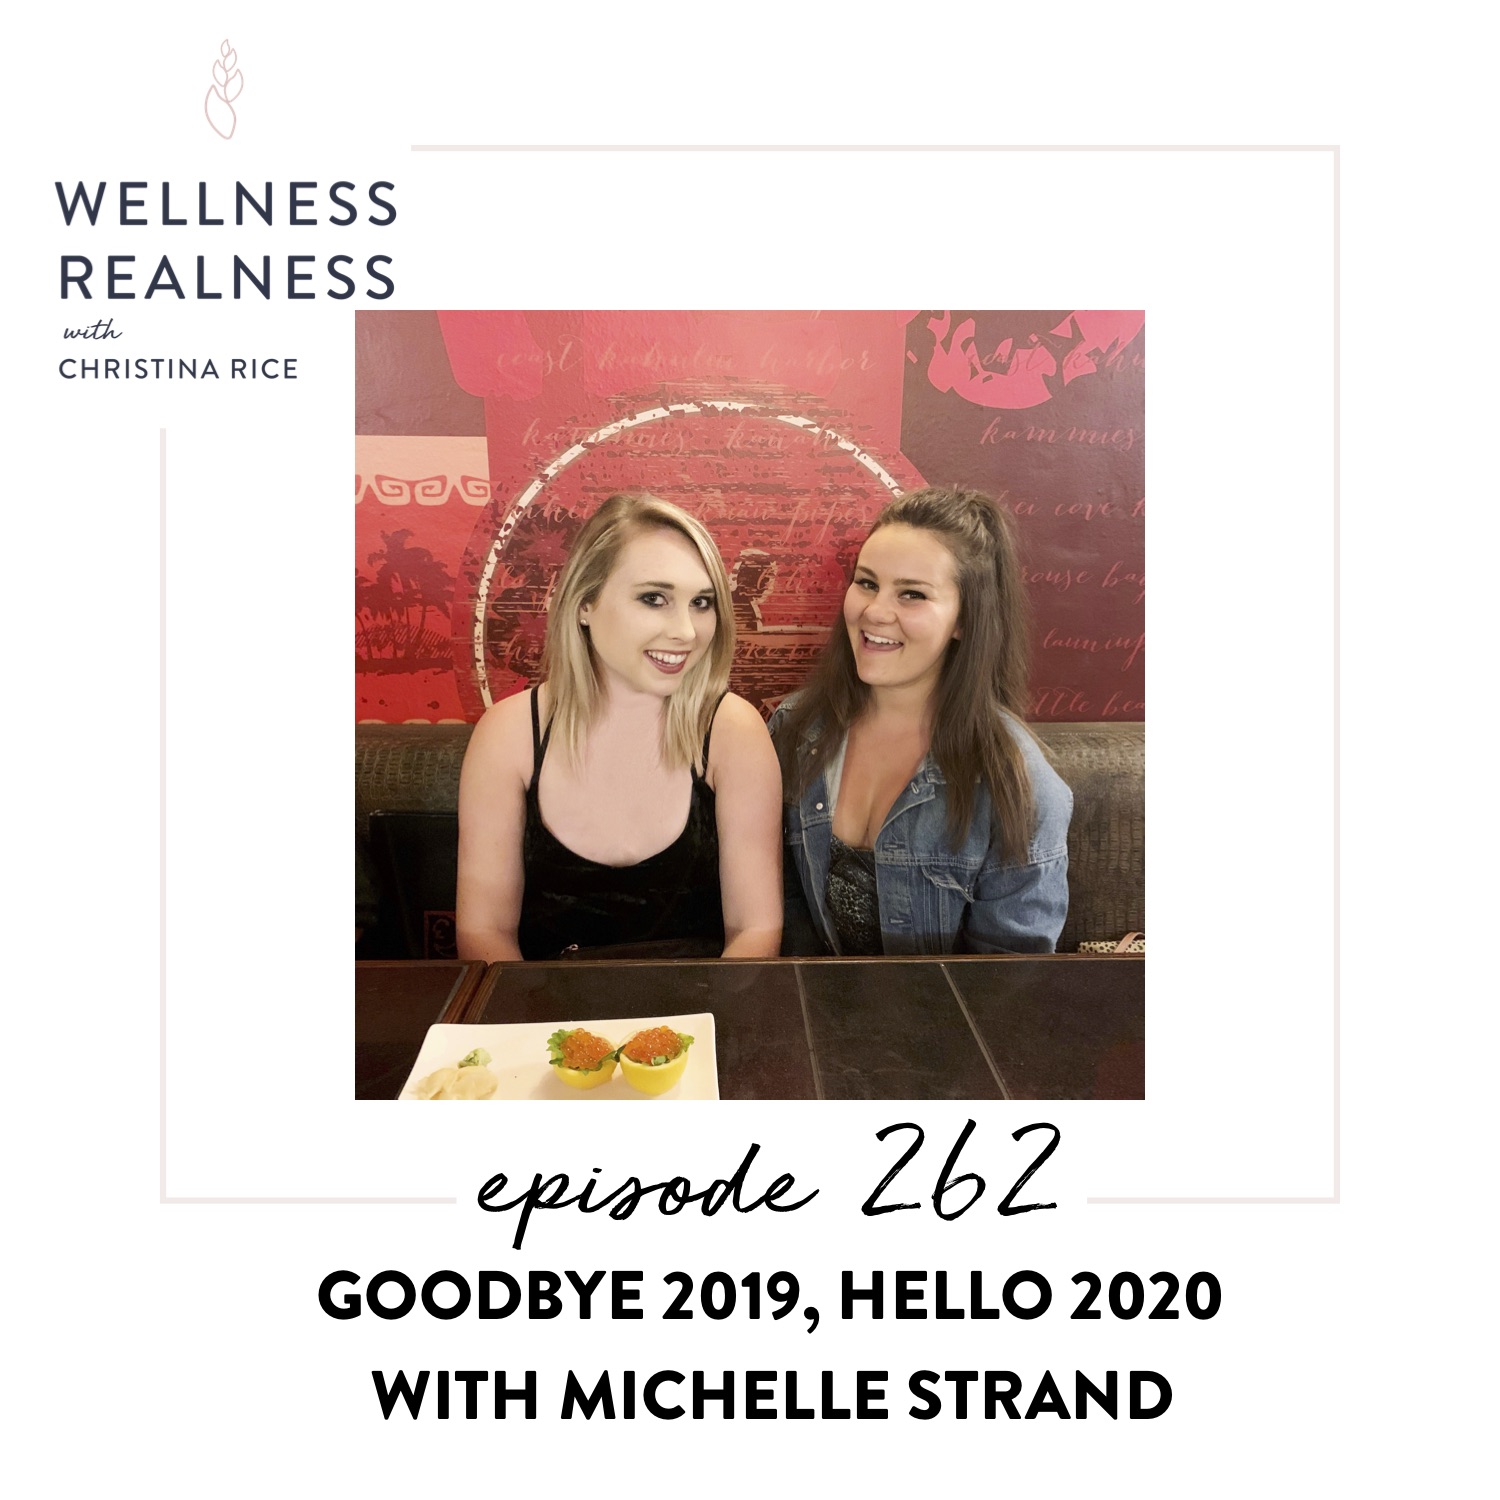 262: Goodbye 2019, Hello 2020 with Michelle Strand